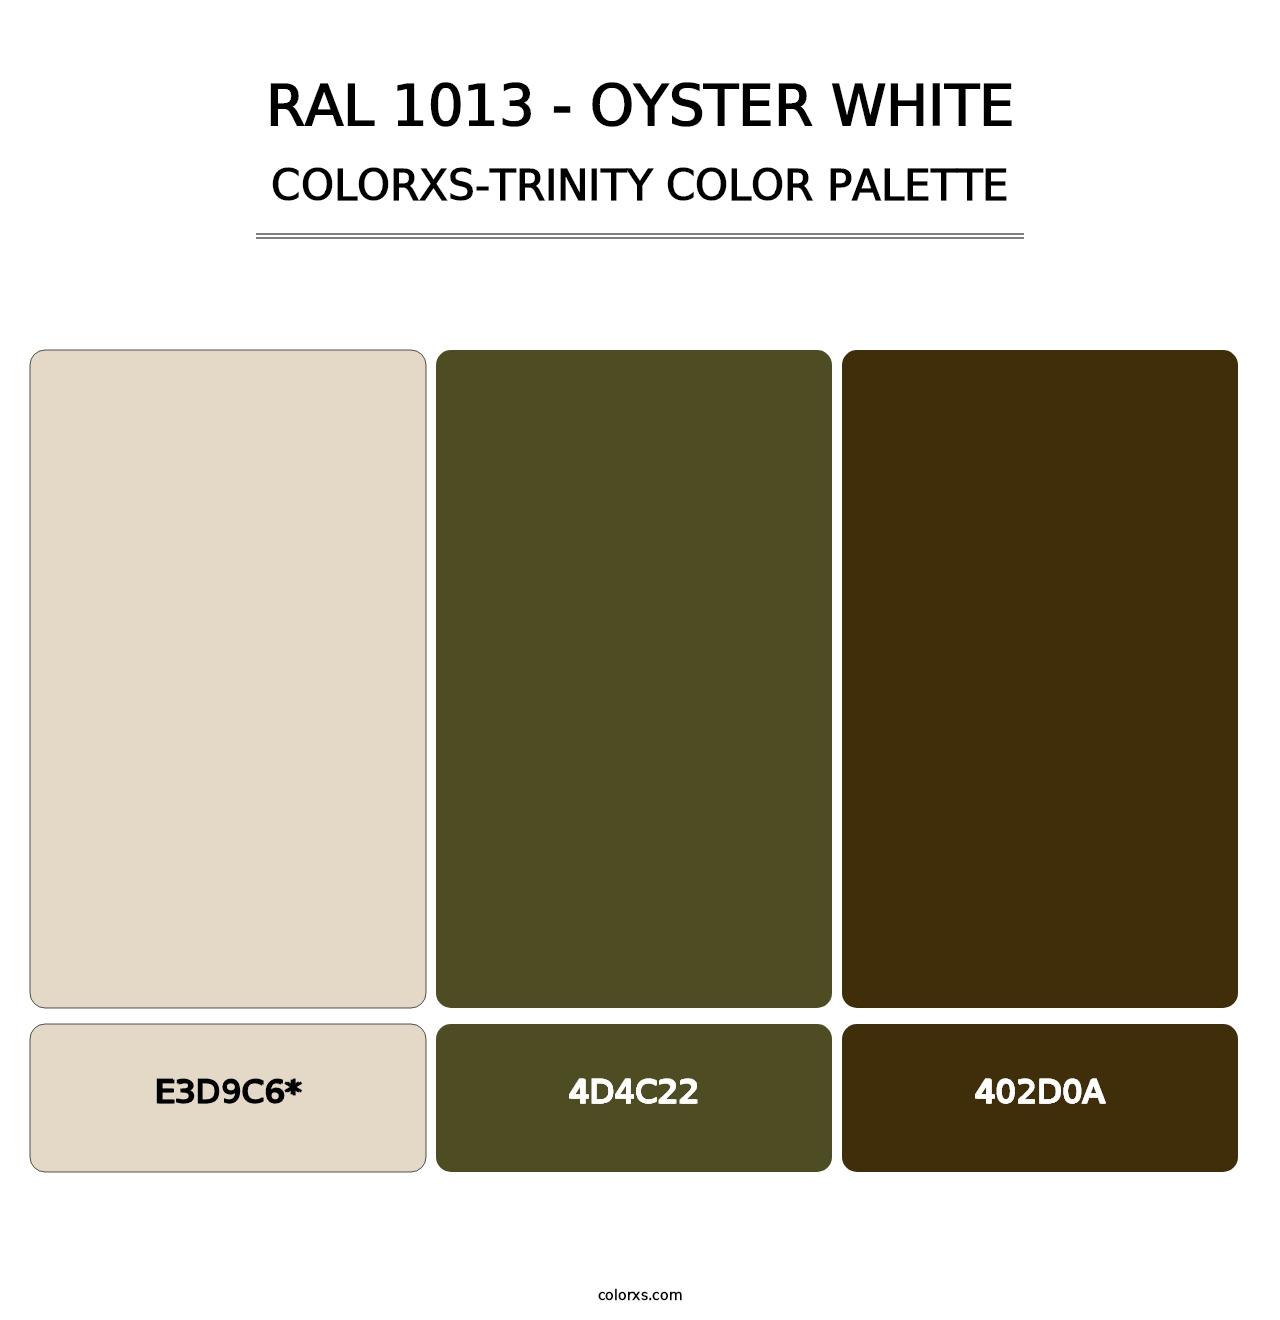 RAL 1013 - Oyster White - Colorxs Trinity Palette